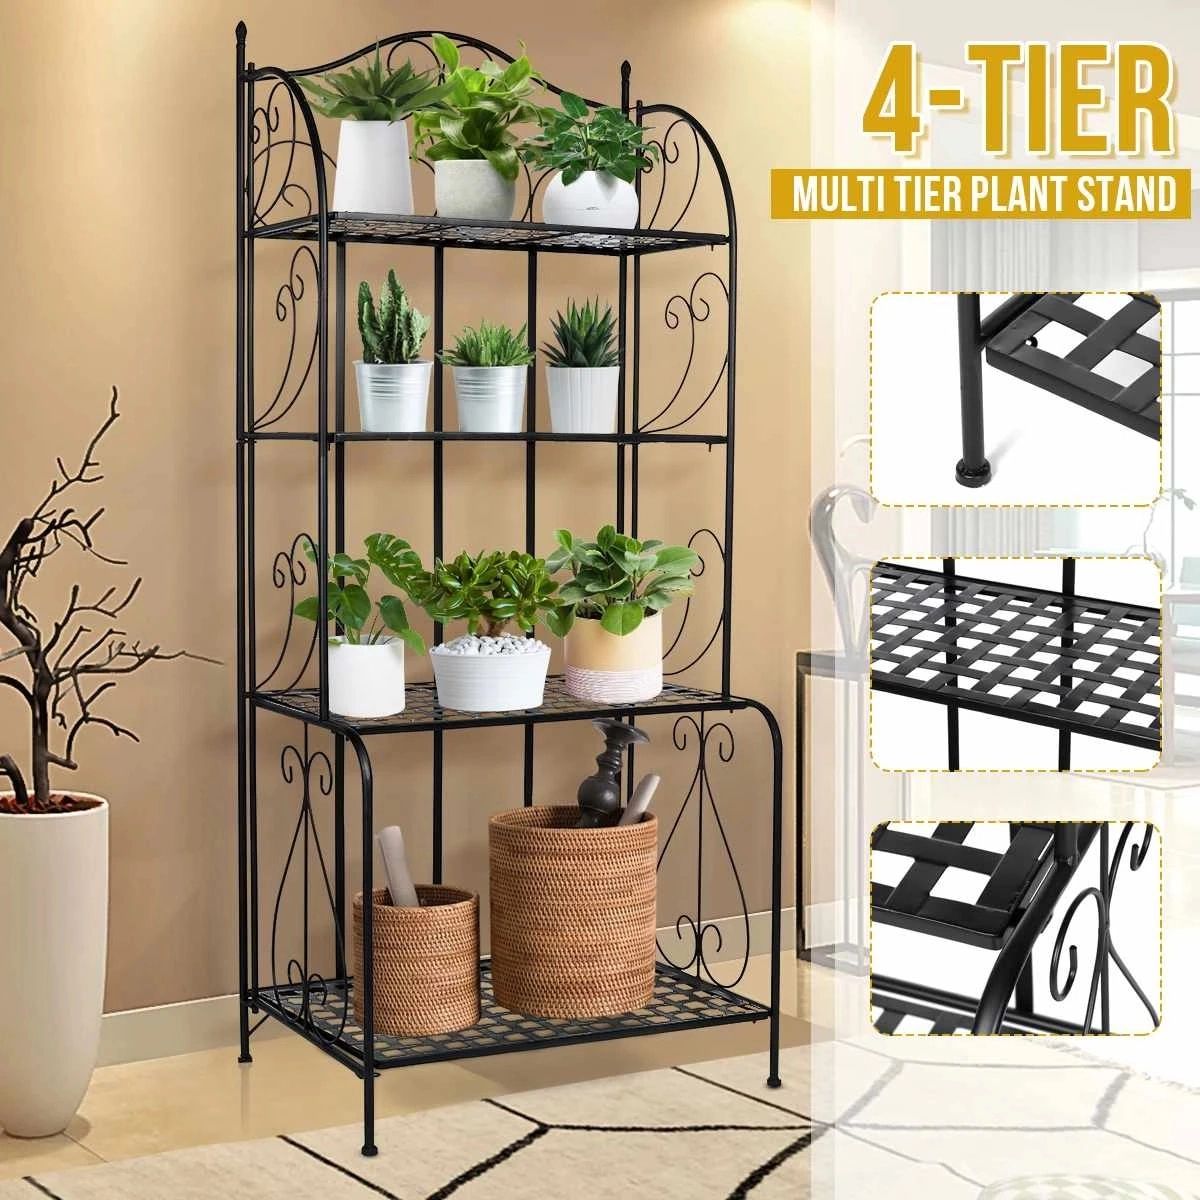 Big Size 4 Tier Metal Plant Stand Flower Pot Rack Outdoor Display Shelf  Holder Home Decor Indoor Balcony Flower Pot Storage Rack|plant Shelves| –  Aliexpress Throughout Four Tier Metal Plant Stands (View 14 of 15)